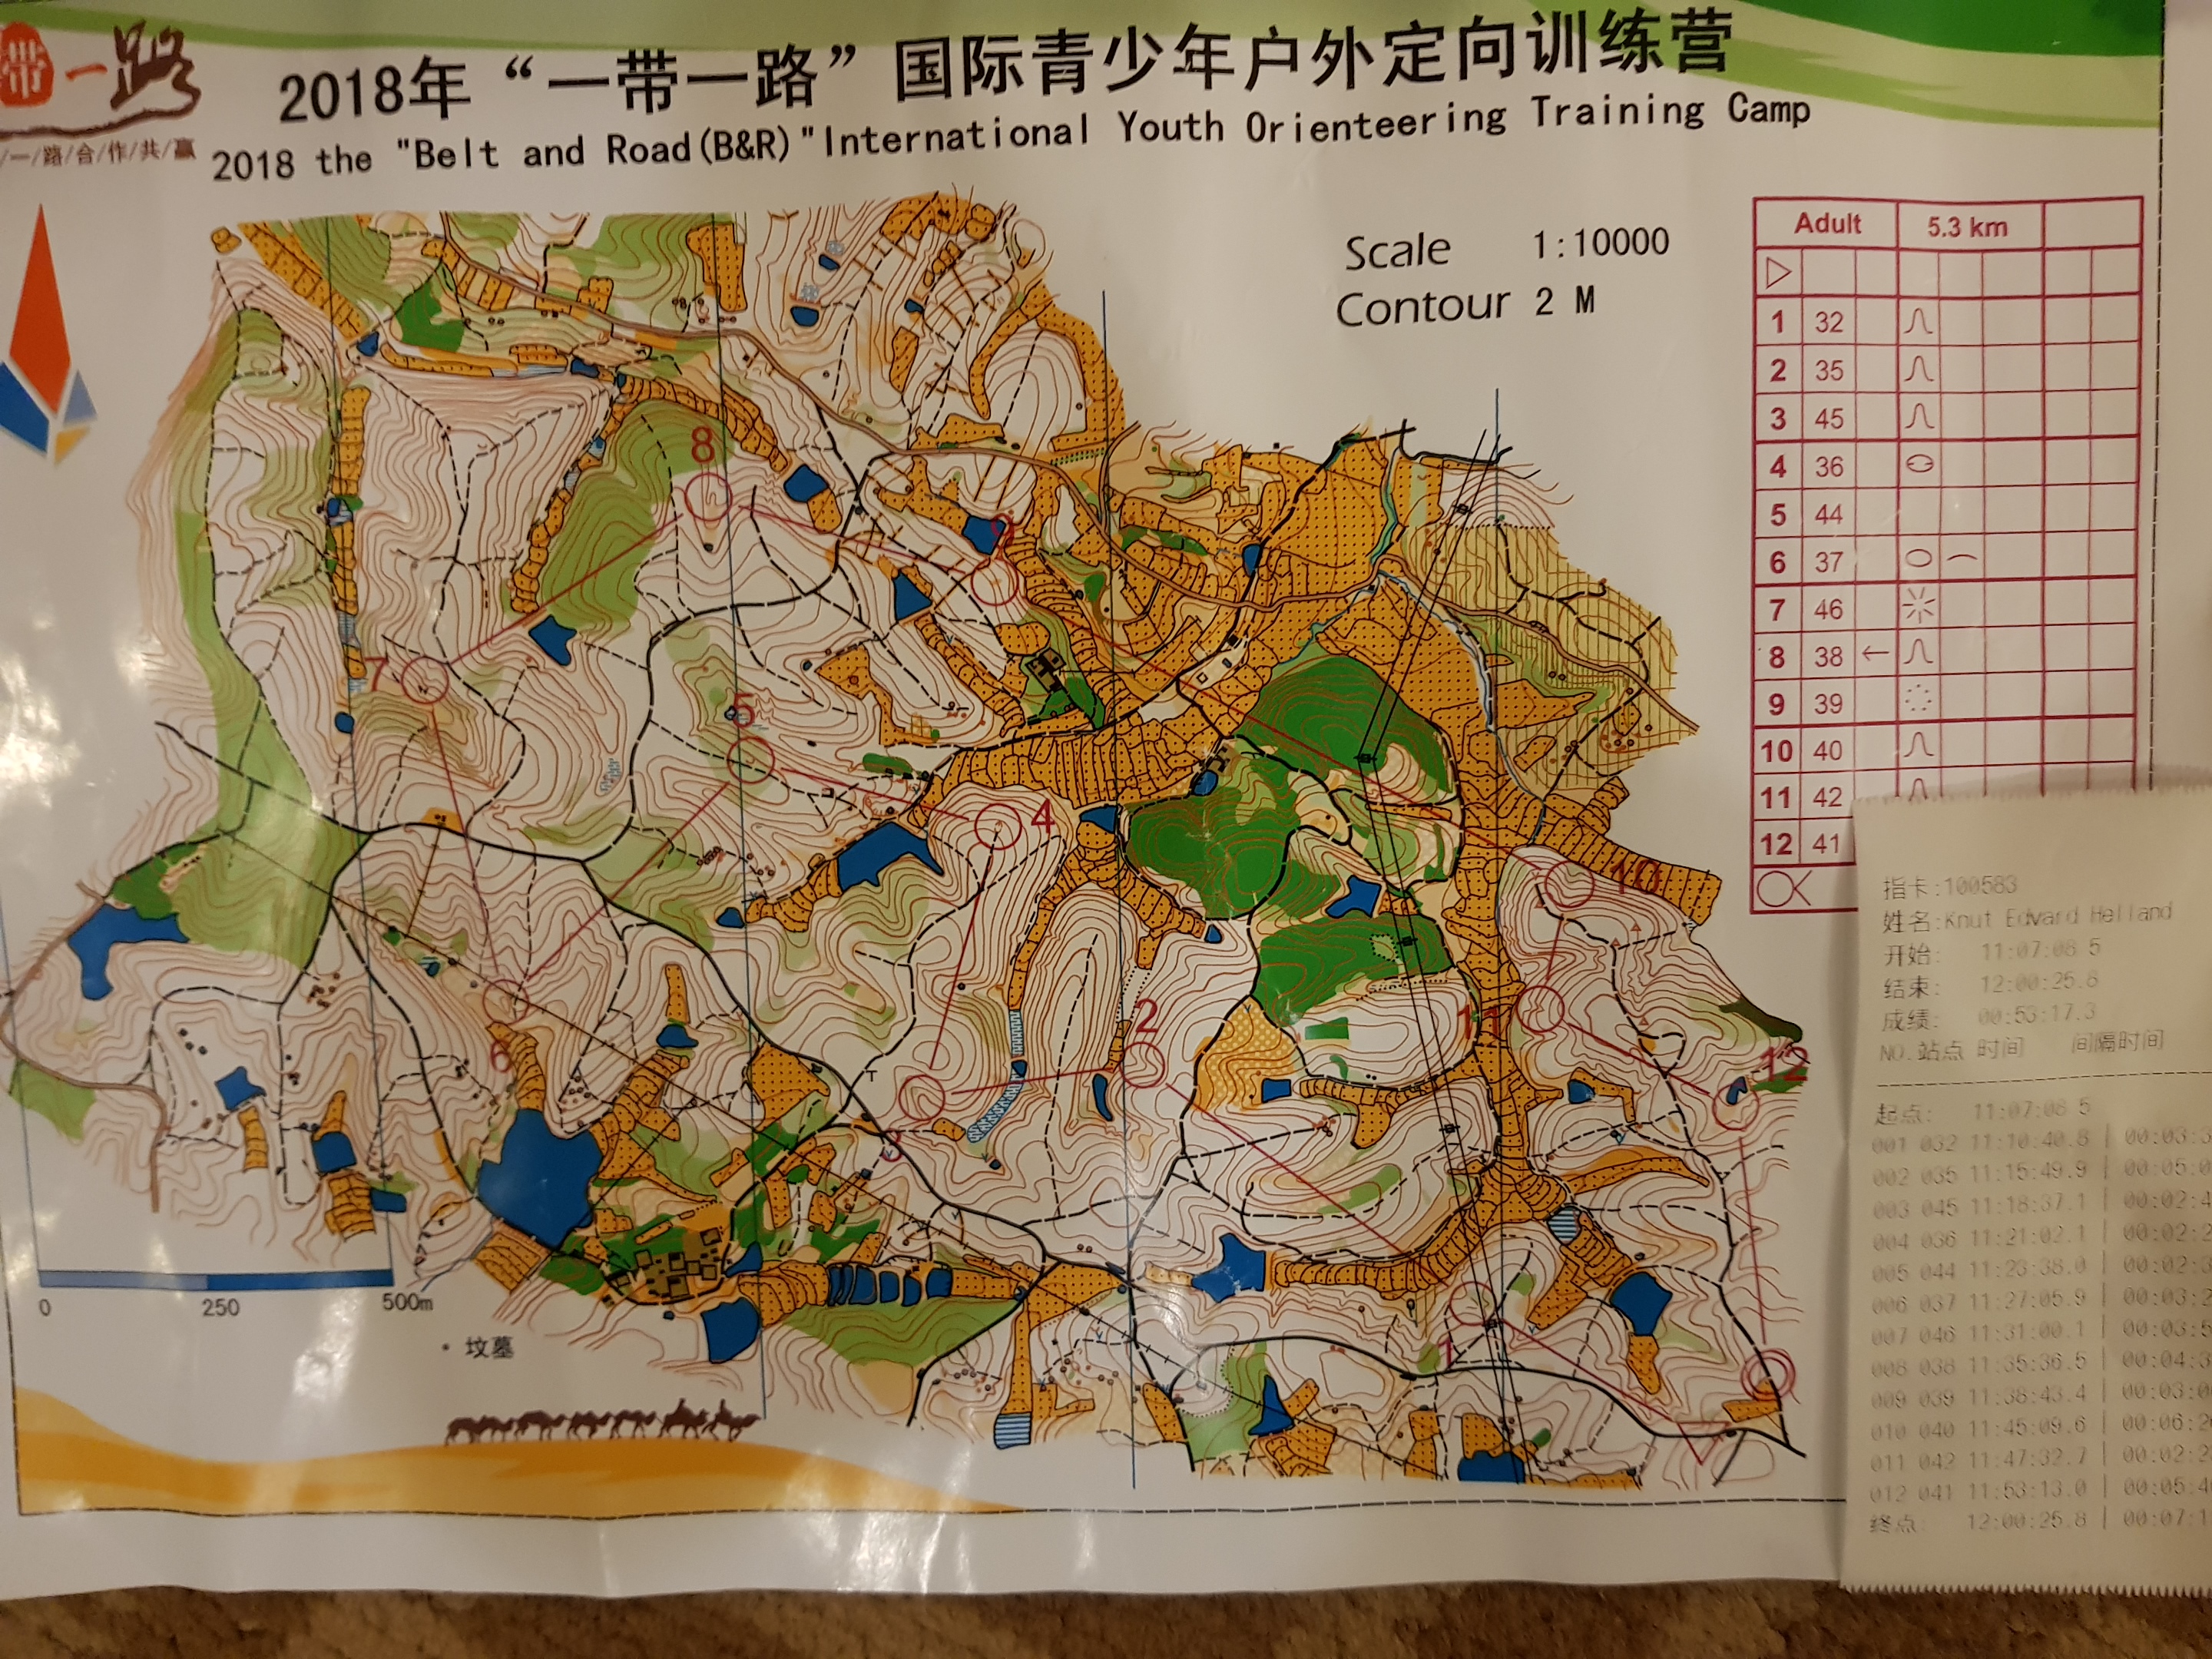 Belt and Road International Youth Orienteering Camp (25.10.2018)